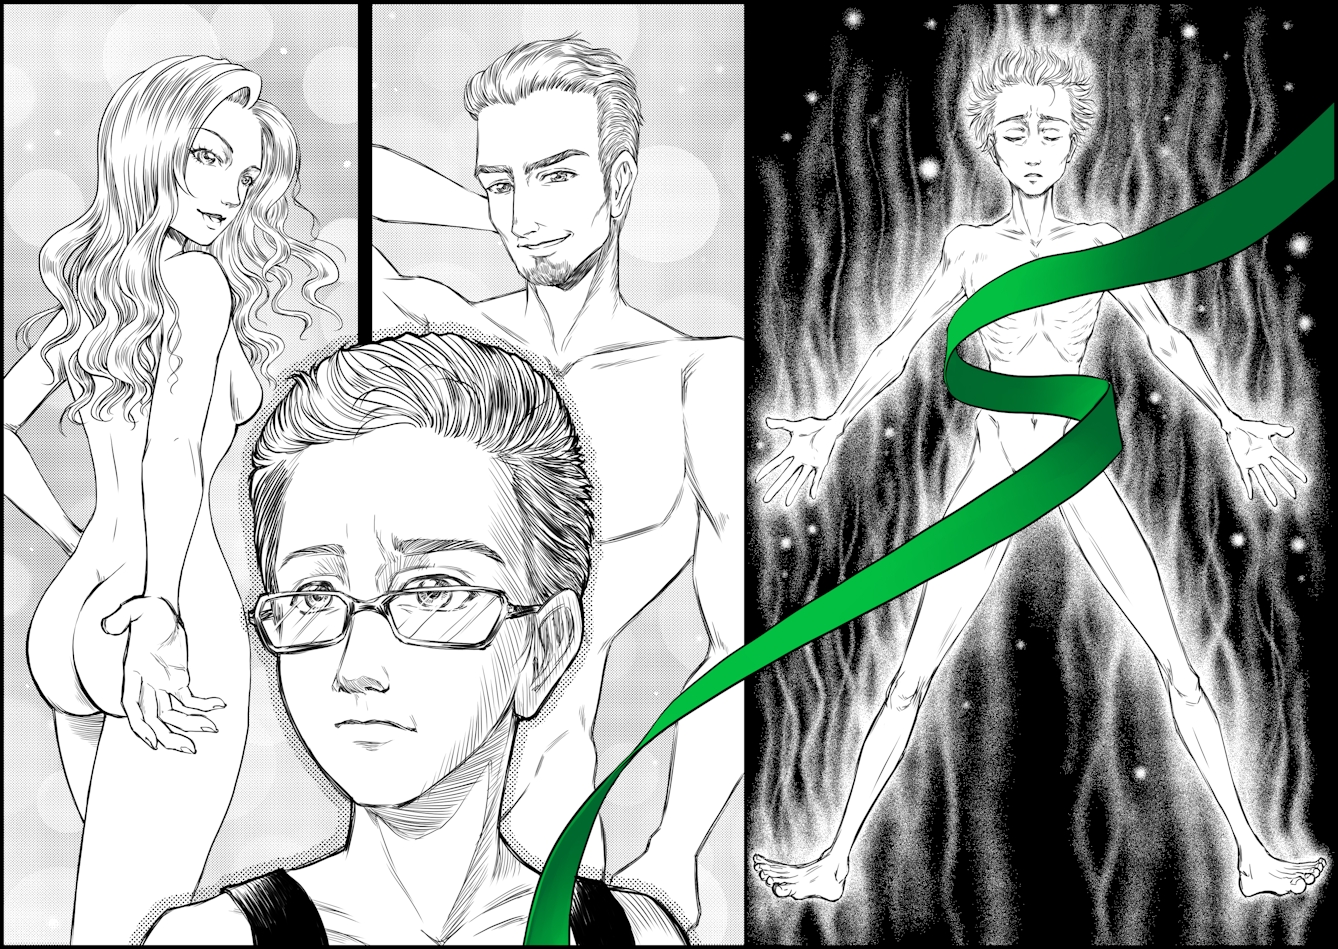 Illustration in the style of Manga graphic novels, showing two scenes. On the left is teh face of a young person wearing glasses. Behind them are two naked figures, one female, one male. On the right is the same young person, naked and full bodies, but looking thin. A green ribbon zig-zags over the body covering the chest and groin areas.